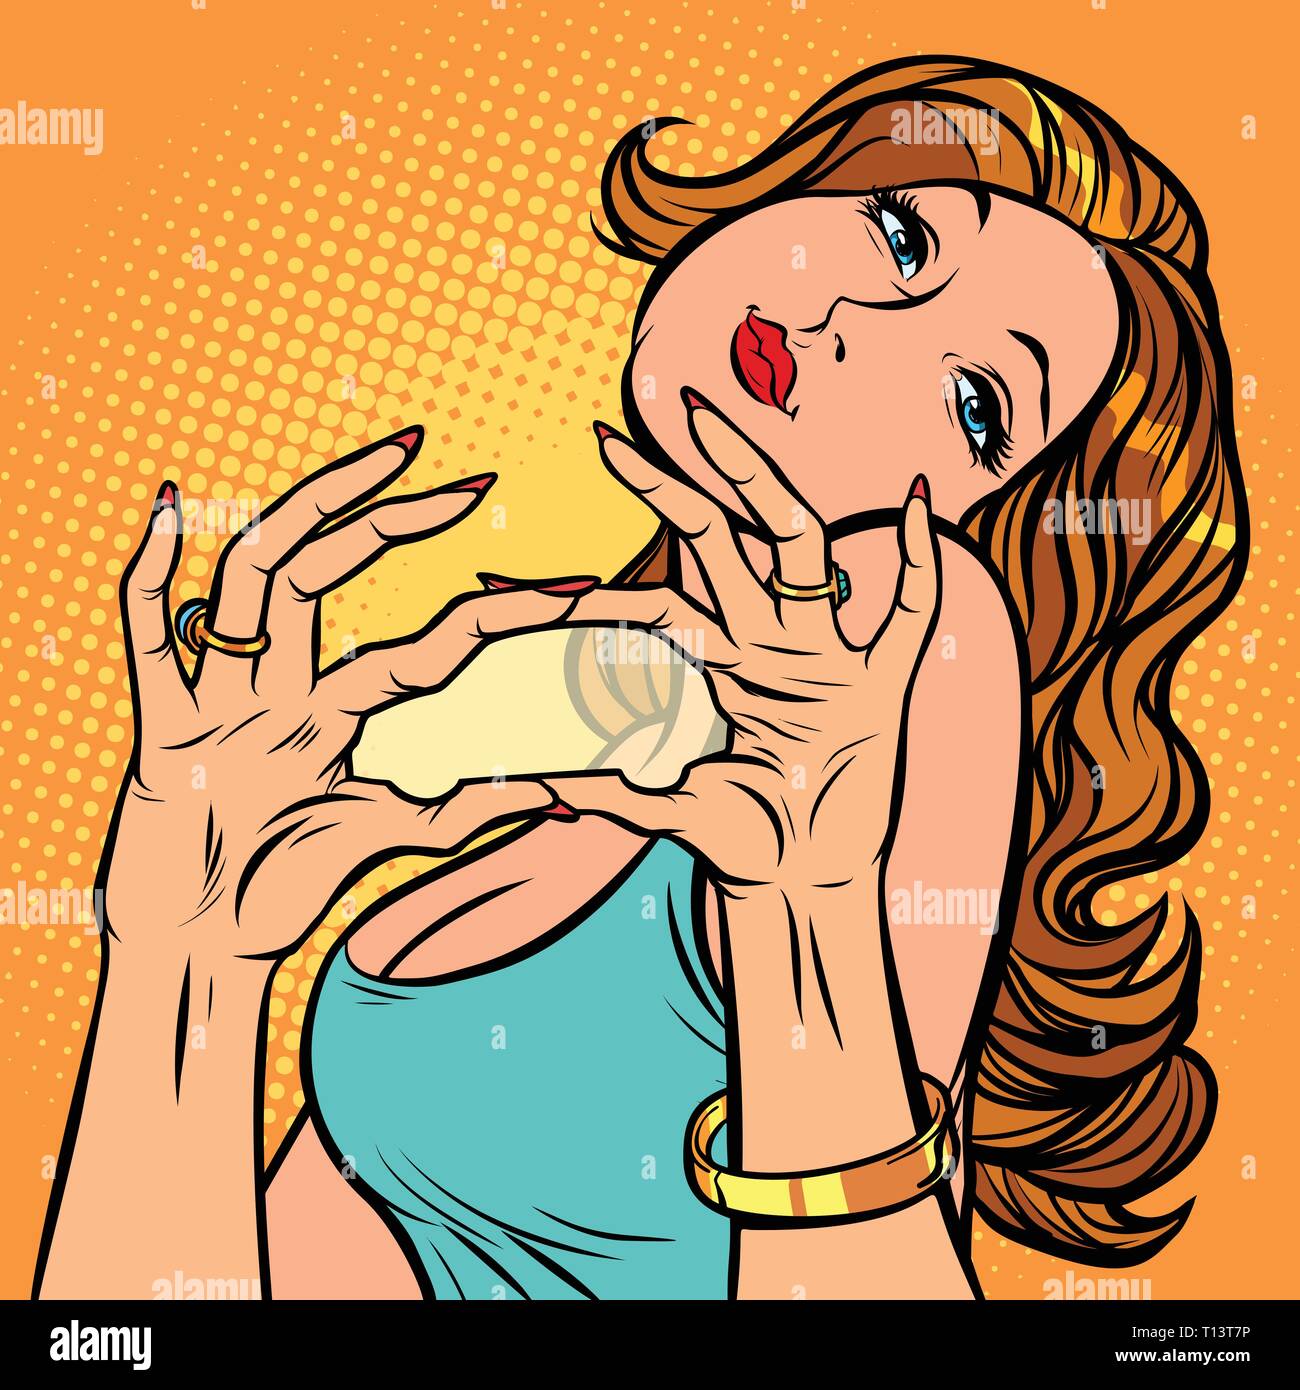 Woman dreams of car, hand gesture gift Stock Vector